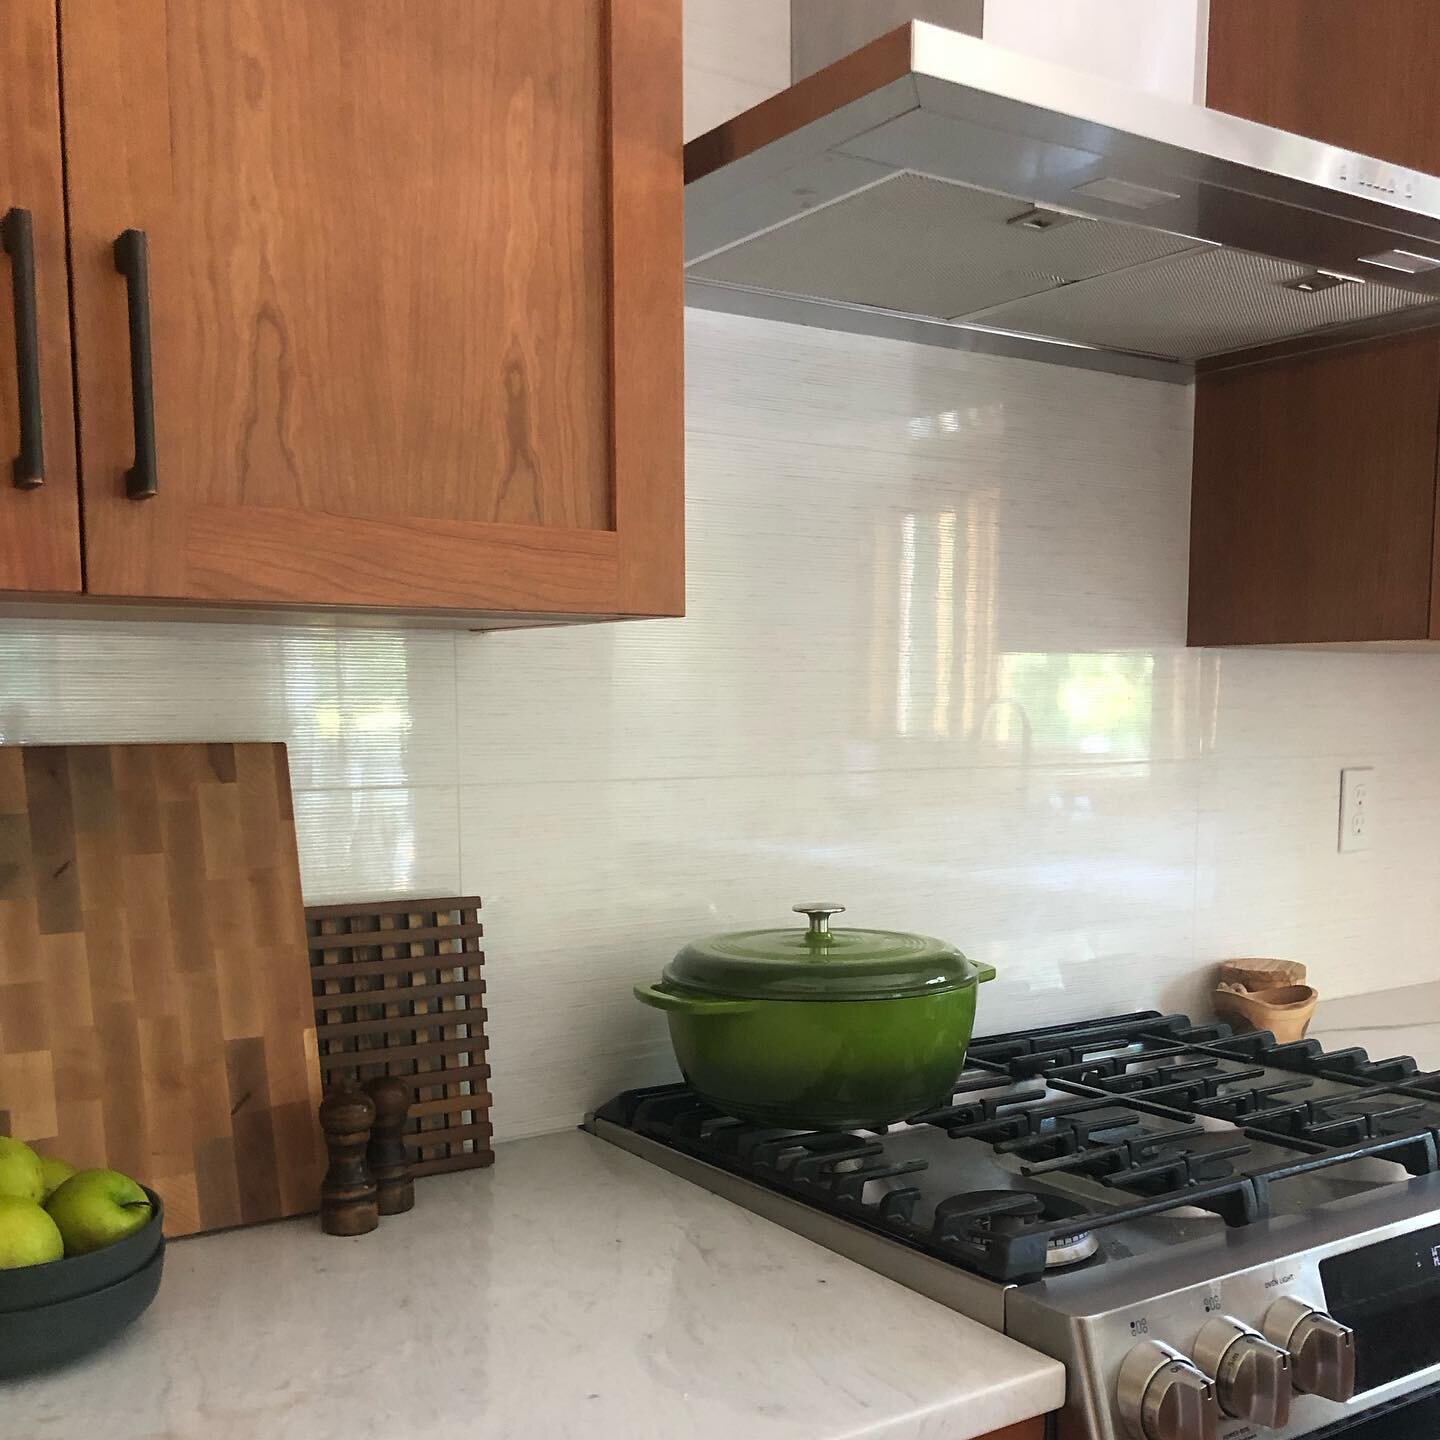 That&rsquo;s a wrap for this Bethesda Kitchen remodel. The large format backsplash tile and quartzite countertops give a sense of calm with modern clean lines. However they are also designed with low maintenance easy cleaning in mind. 

#kitchendesig